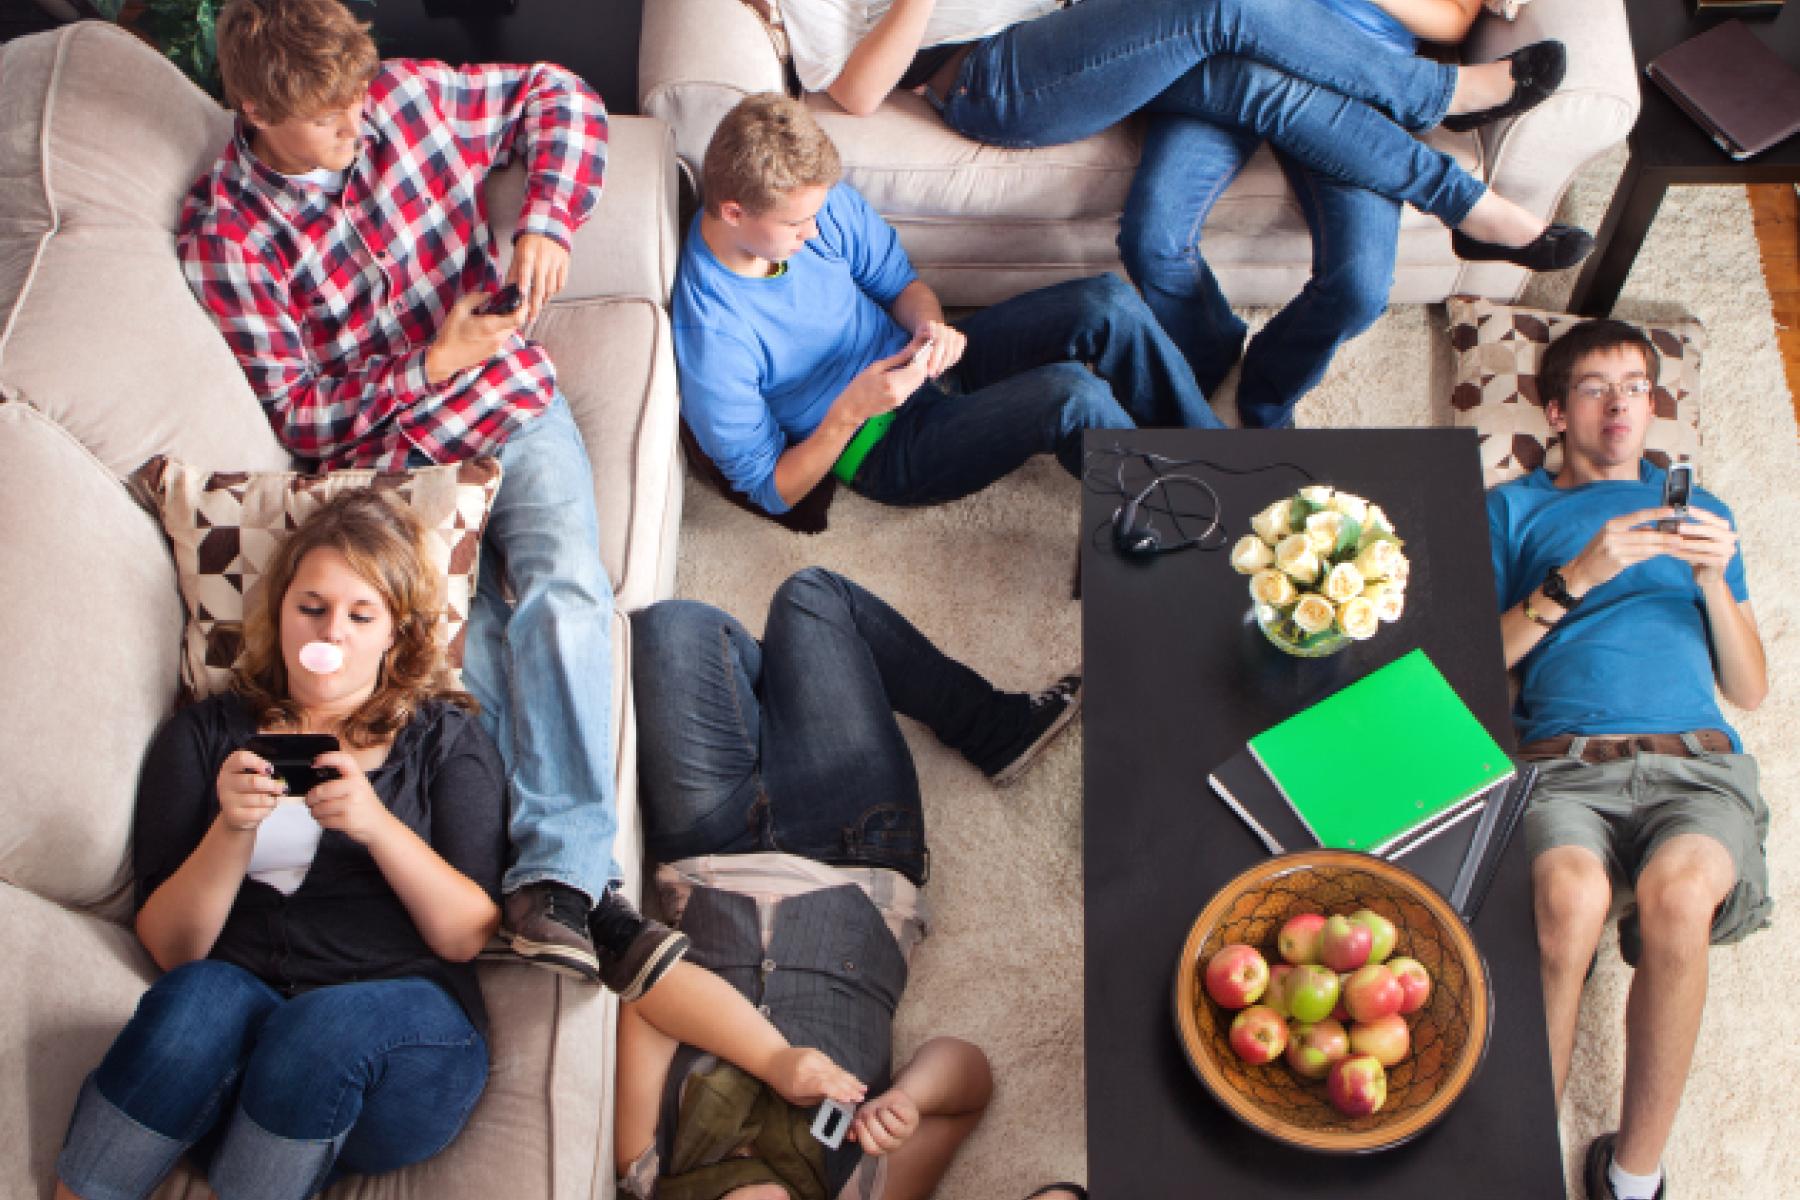 Stock photo of a group of people laying on couches and the floor